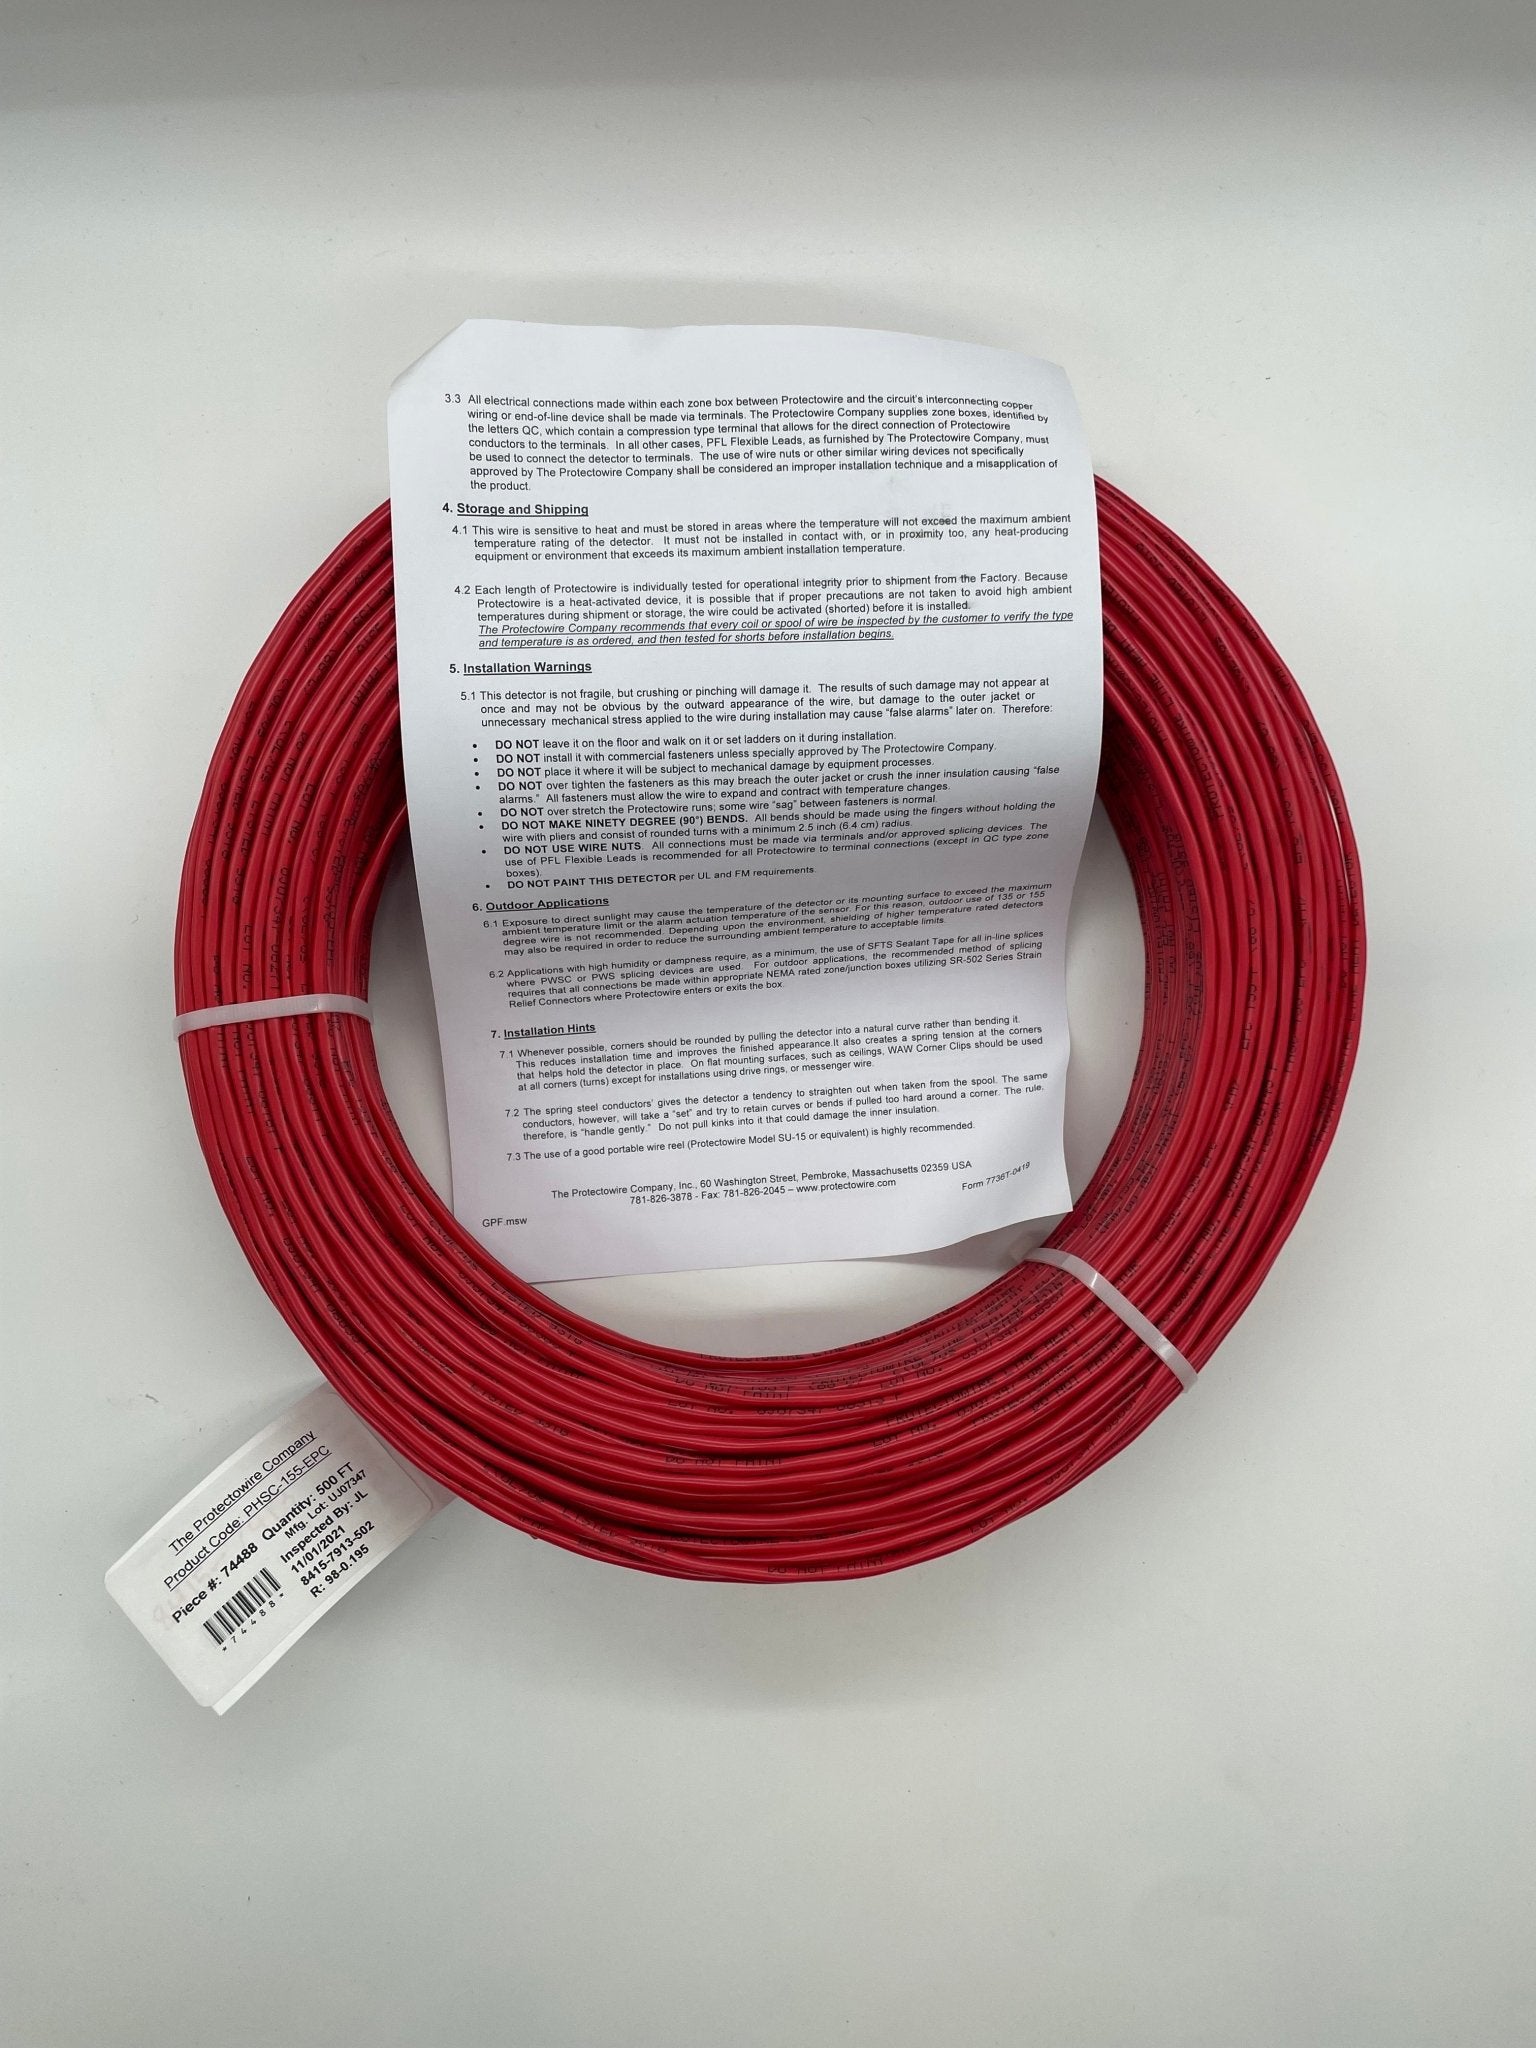 Protectowire PHSC-155-EPC (500 Feet) - The Fire Alarm Supplier